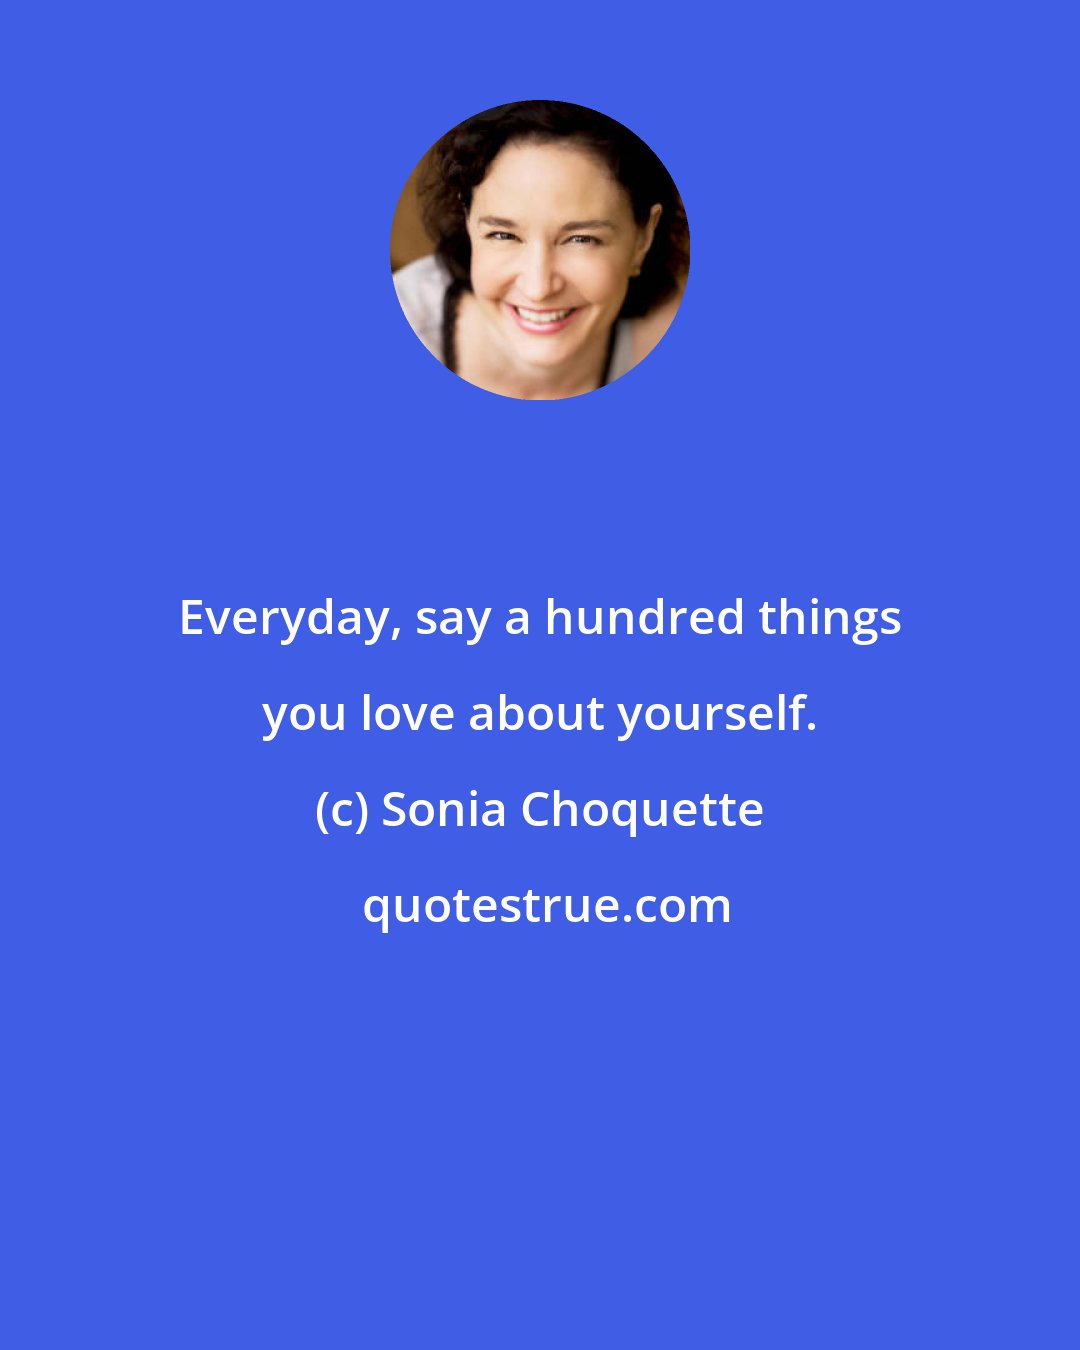 Sonia Choquette: Everyday, say a hundred things you love about yourself.